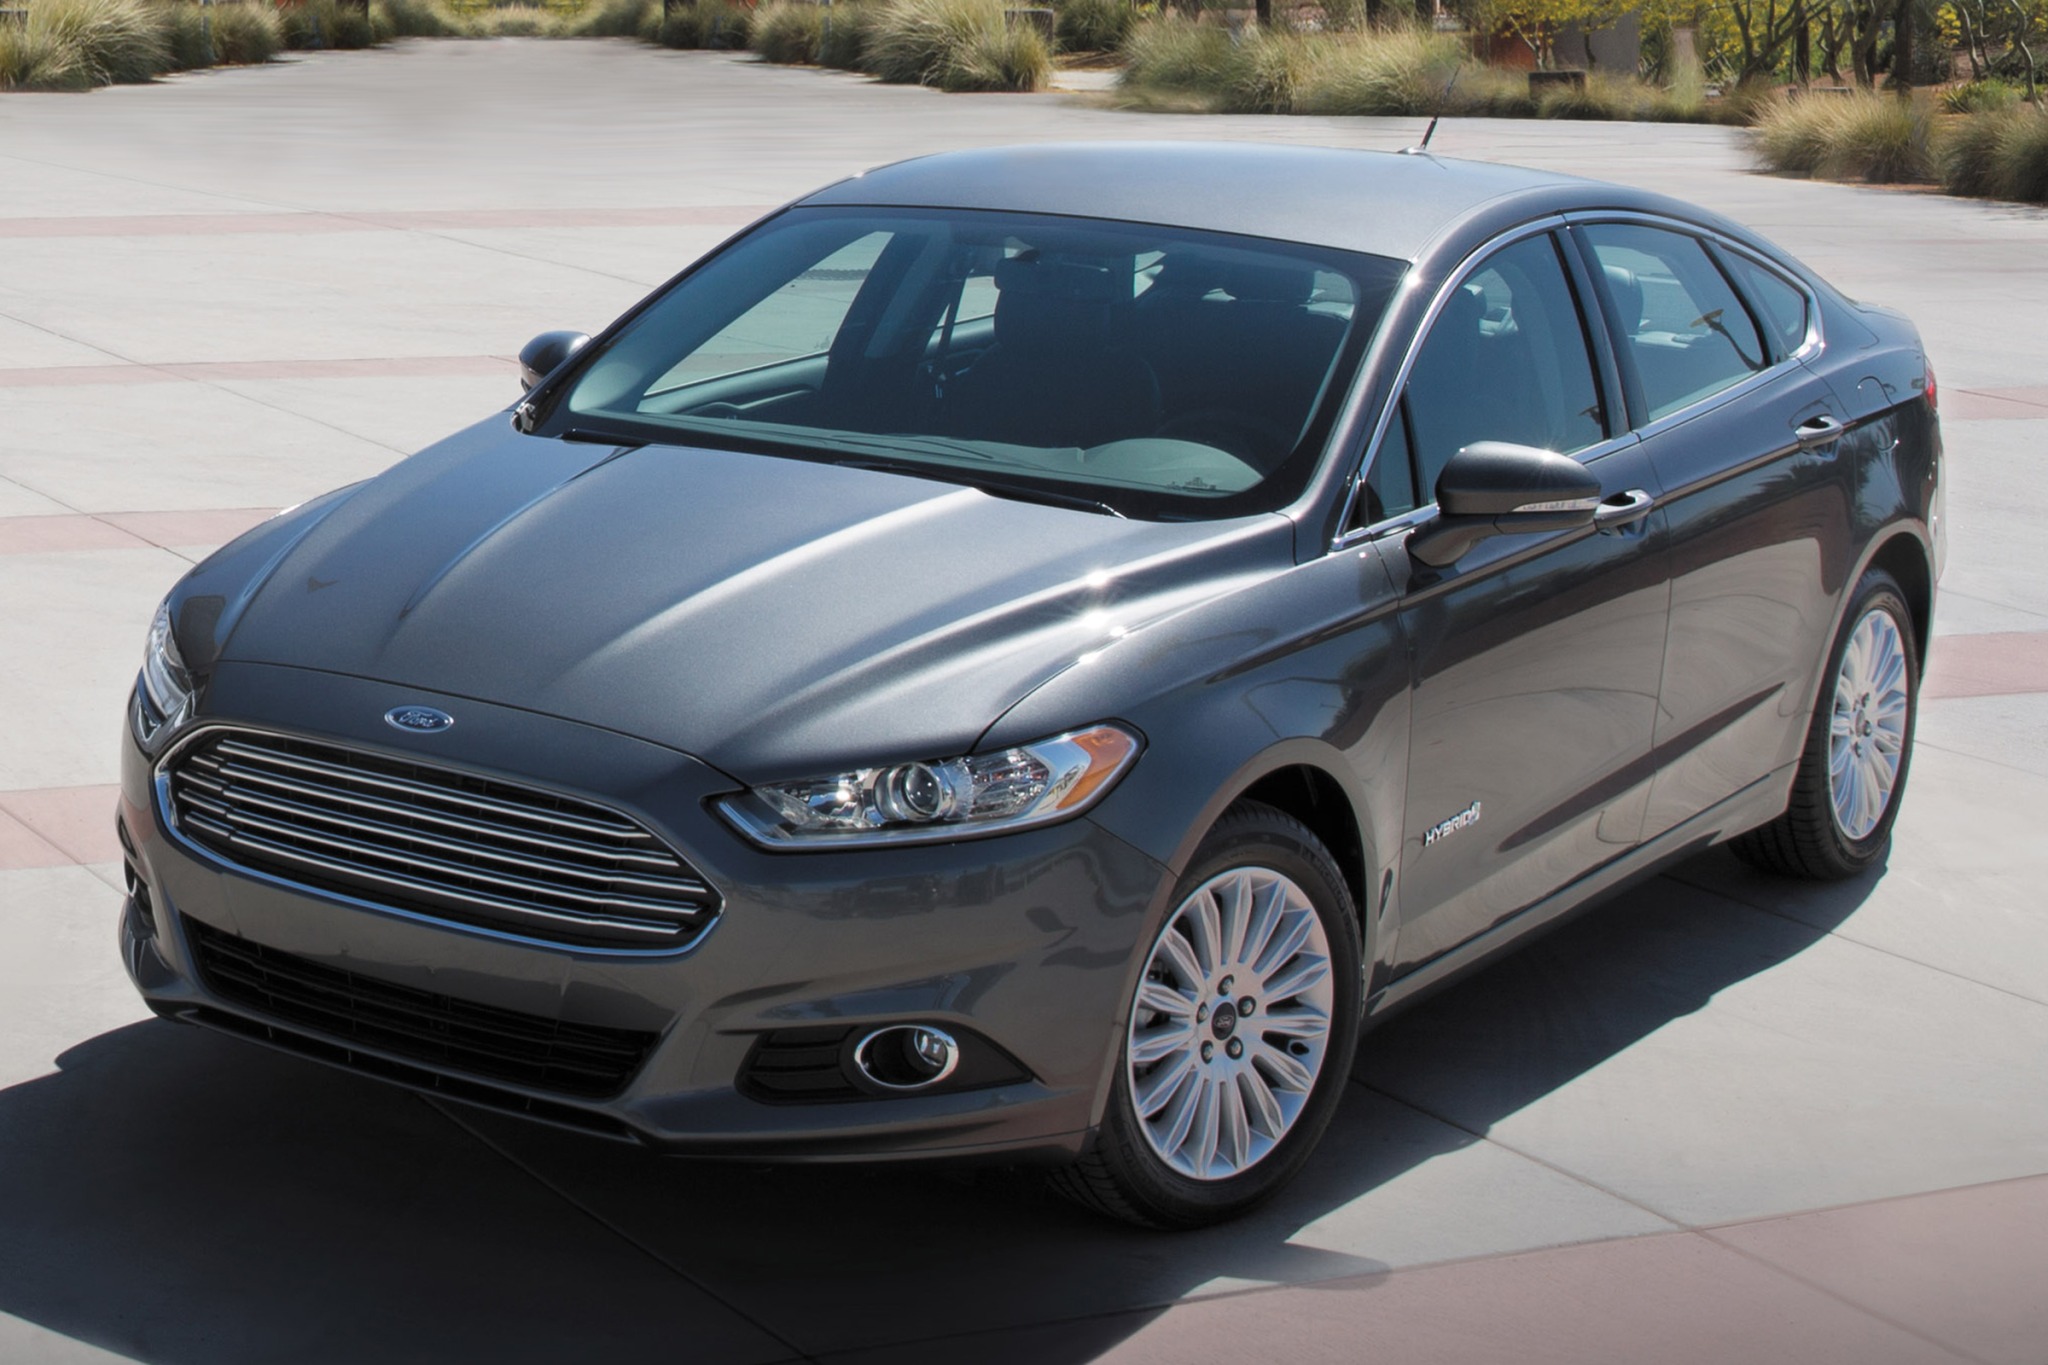 2017 Ford Fusion Hybrid S VIN Number Search - AutoDetective